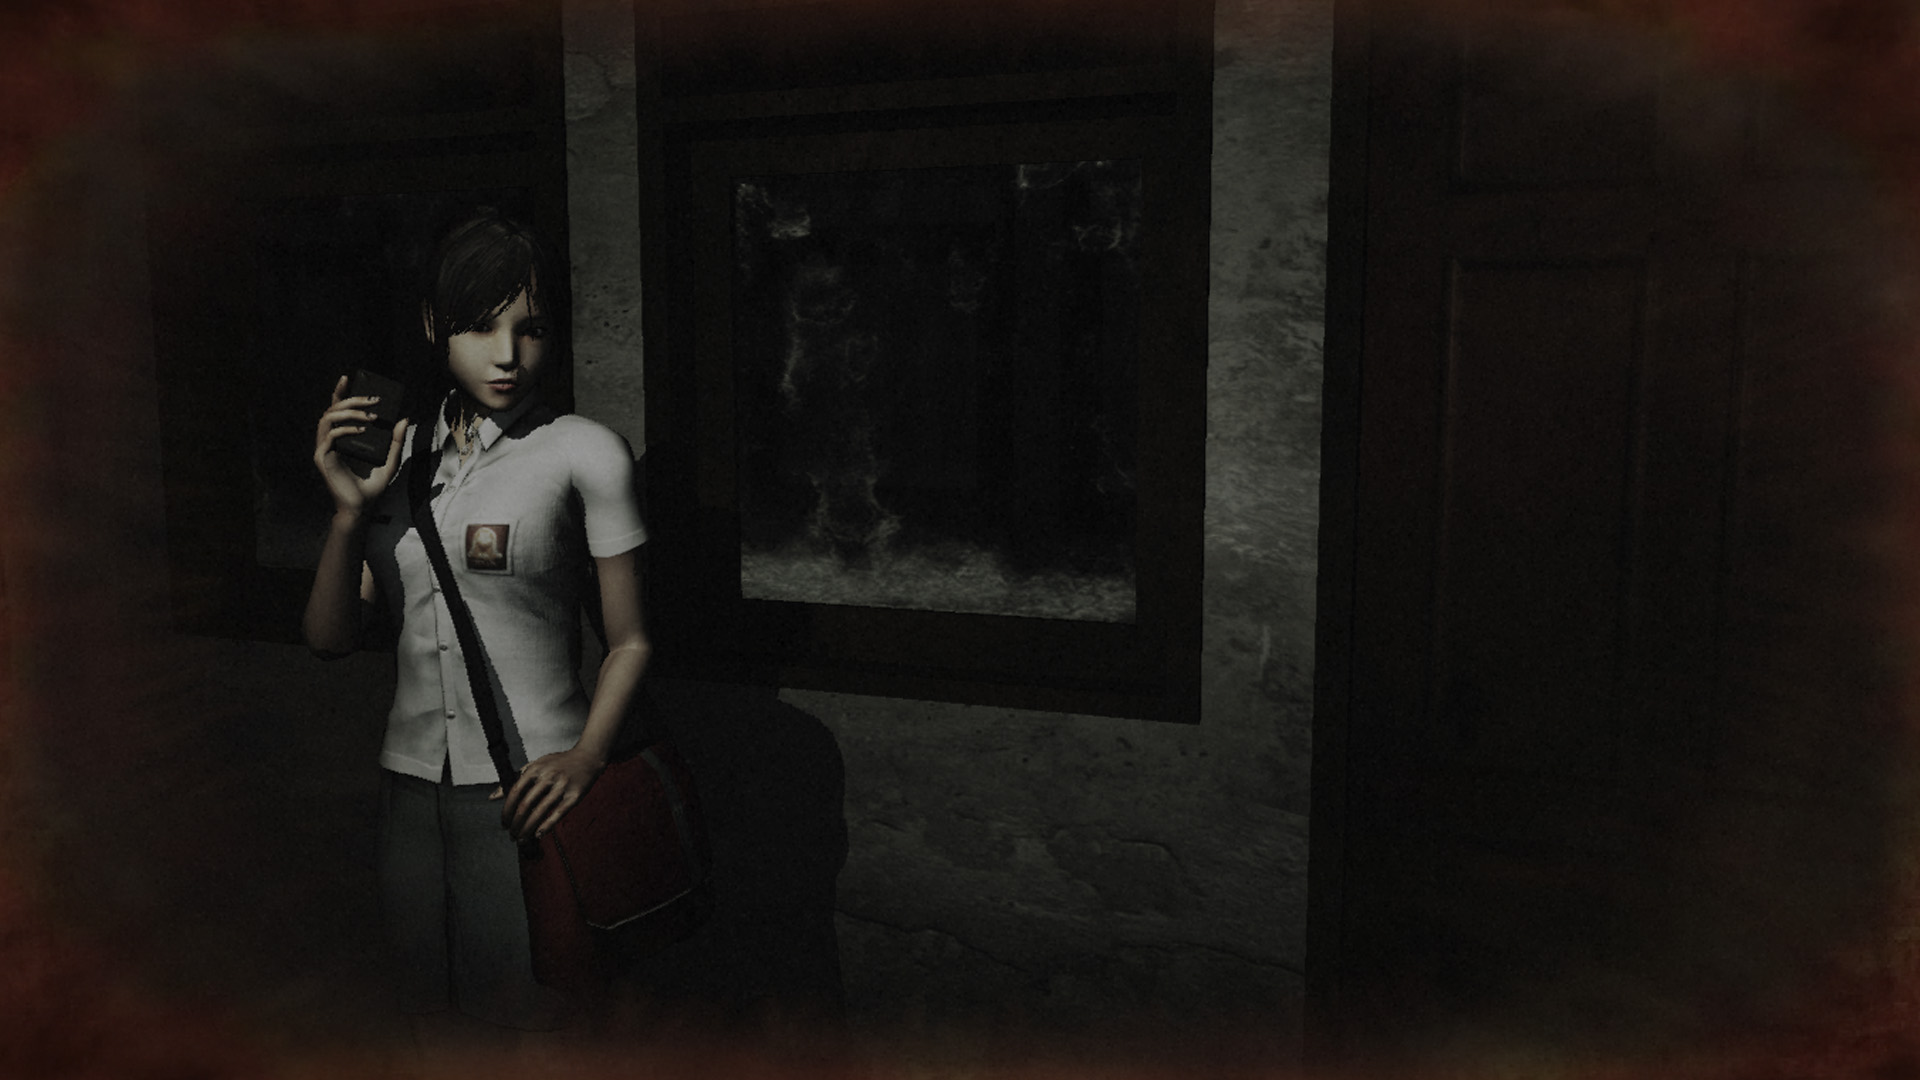 game dreadout download free